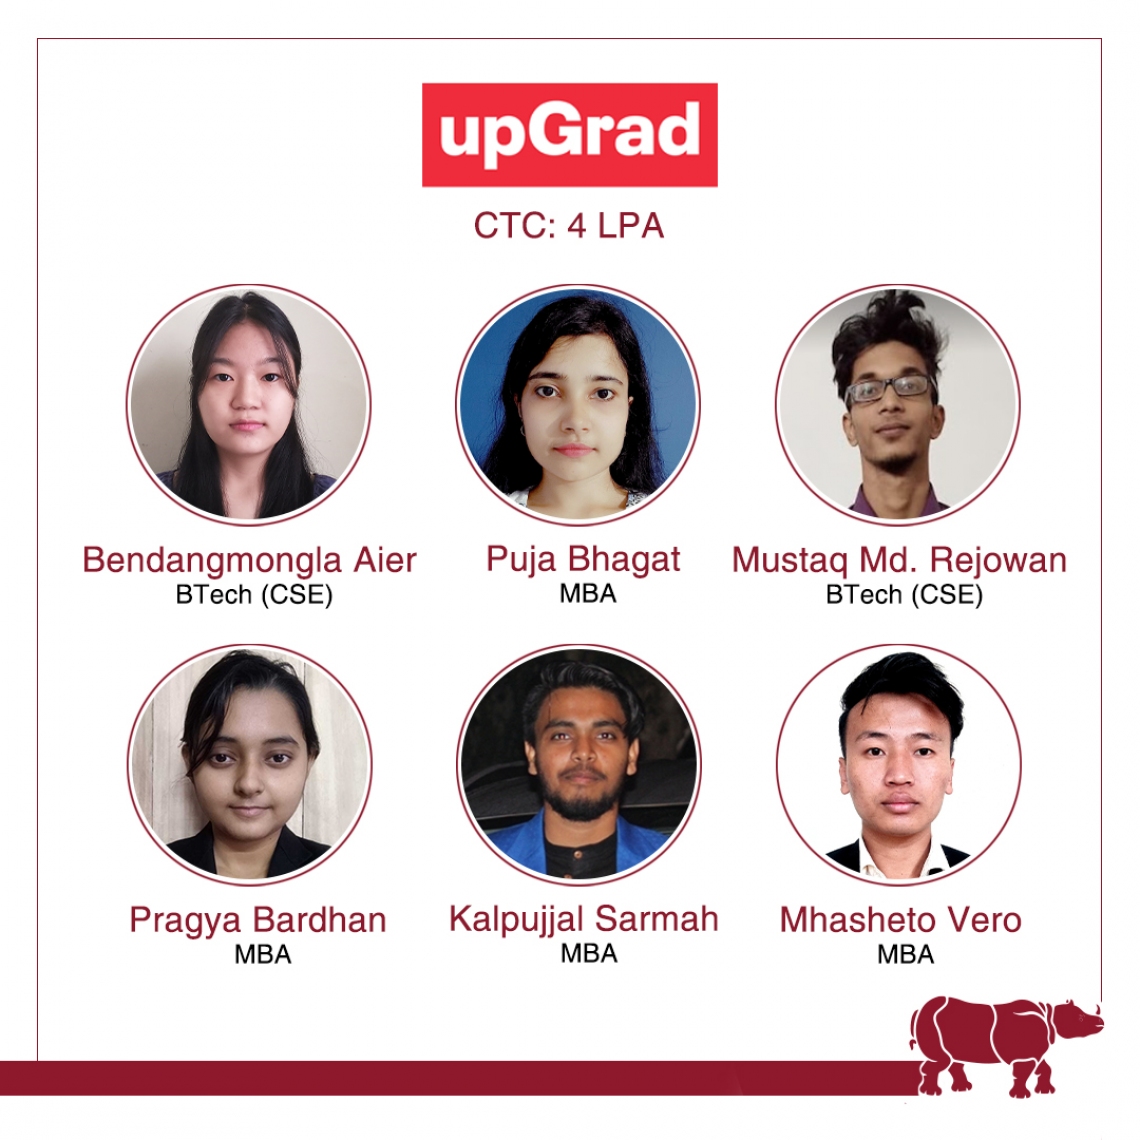 Congratulations on getting placed in UpGrad